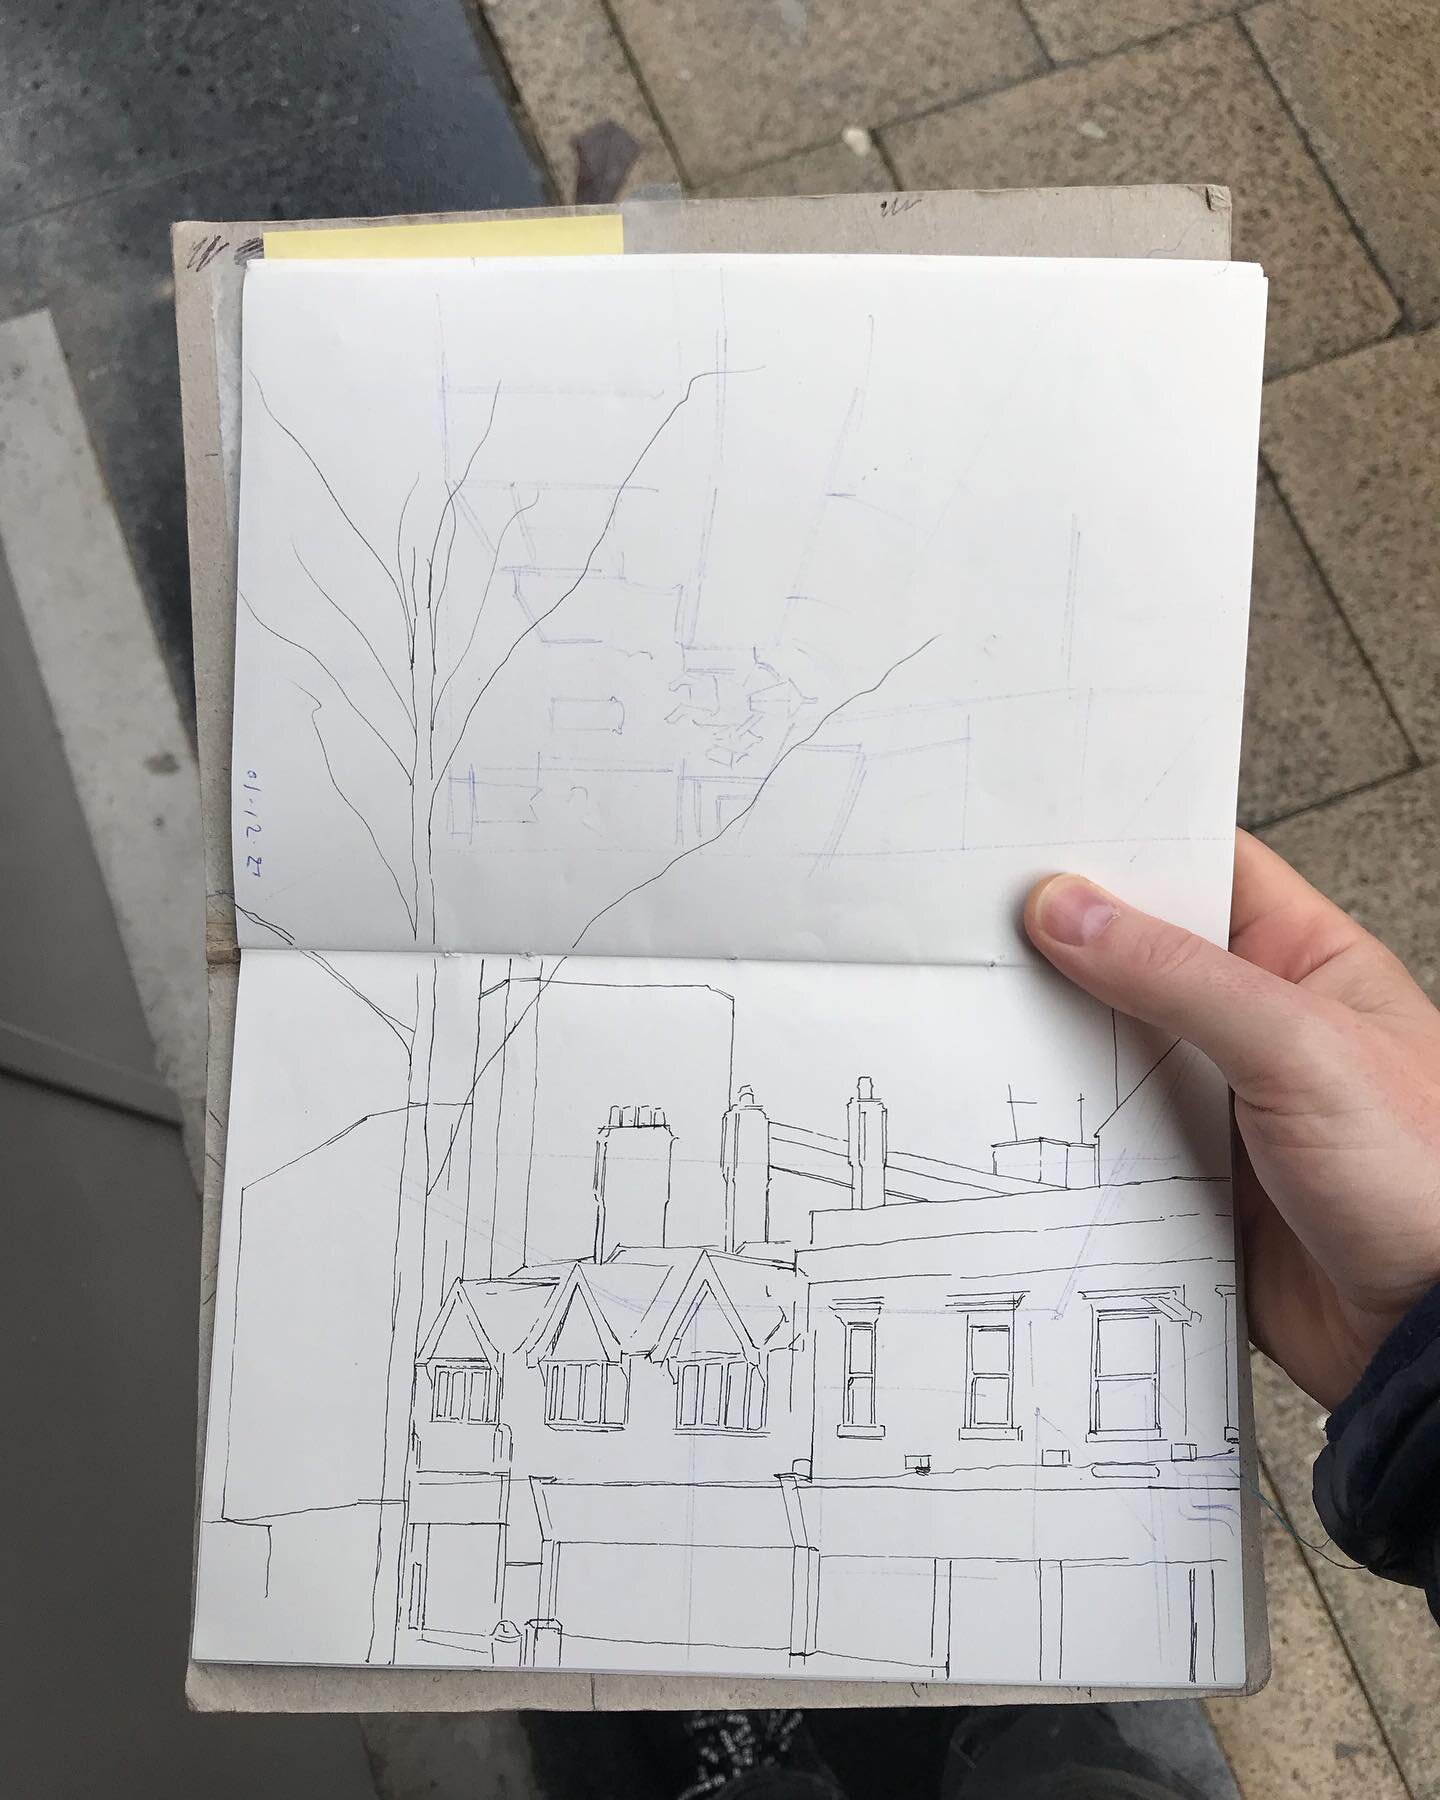 One of the ways I have coped during this period has been to fall back in love with drawing from life. Each day, on my lunch break I pick a different spot around Oxford and draw for around 20-30 minutes. I feel in the moment, embrace all the mishaps a